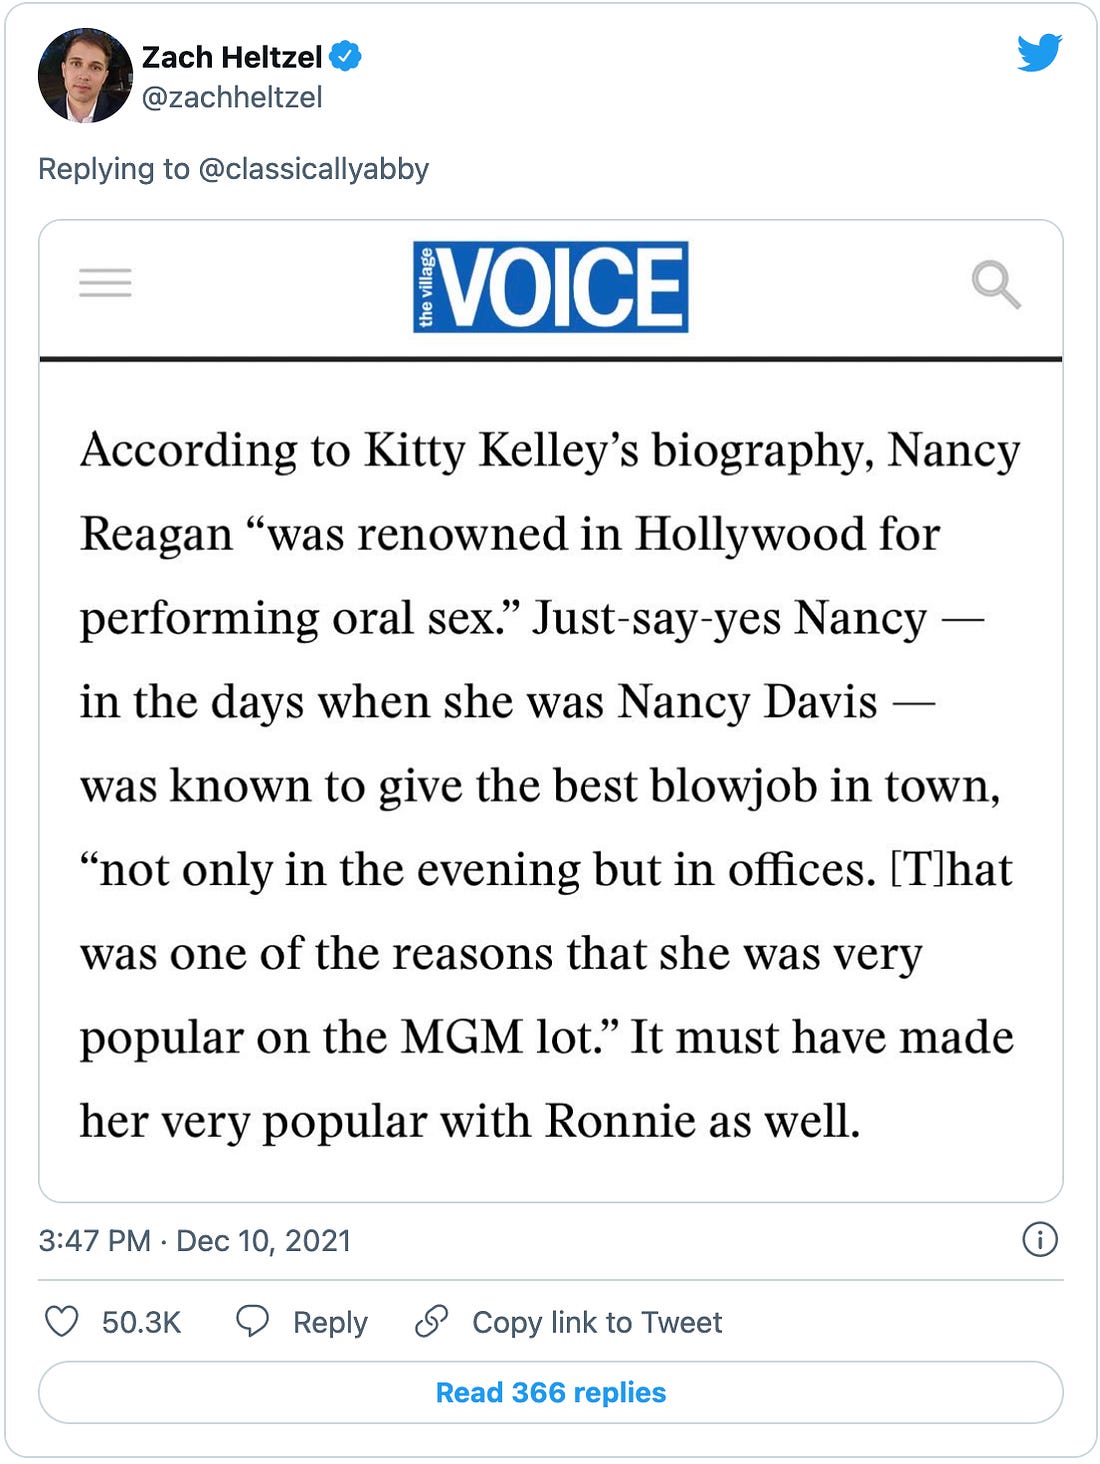 Tweet by @zachheltzl of a screenshot from the Village Voice reading “According to Kitty Kelley's biography, Nancy Reagan ‘was renowned in Hollywood for performing oral sex.’ Just-say-yes Nancy—in the days when she was Nancy Davis—was known to give the best blowjob in town, ‘not only in the evening but in offices. That was one of the reasons that she was very popular on the MGM lot.’ It must have made her very popular with Ronnie as well.”